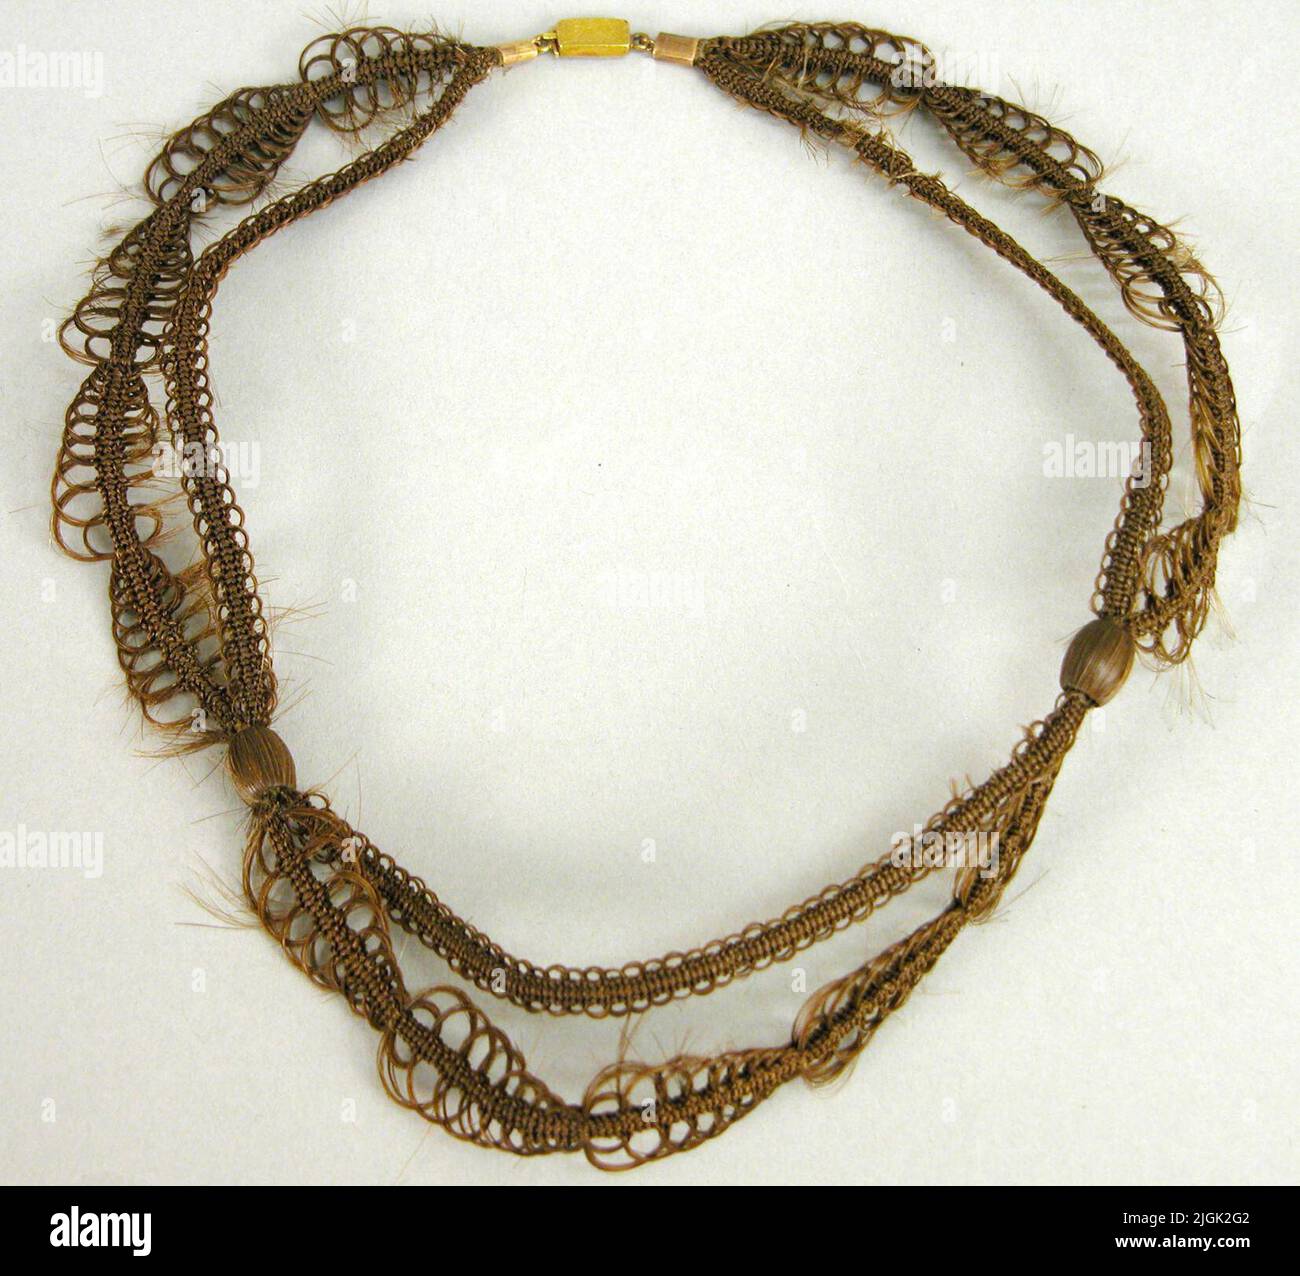 Halsband Necklace of brown hair. Two-row, a row shorter than the other in S-bows. The rows cohesive with two hair -clad bullets. Rectangular lock engraved in l alternatively J L. 19th century. Stock Photo